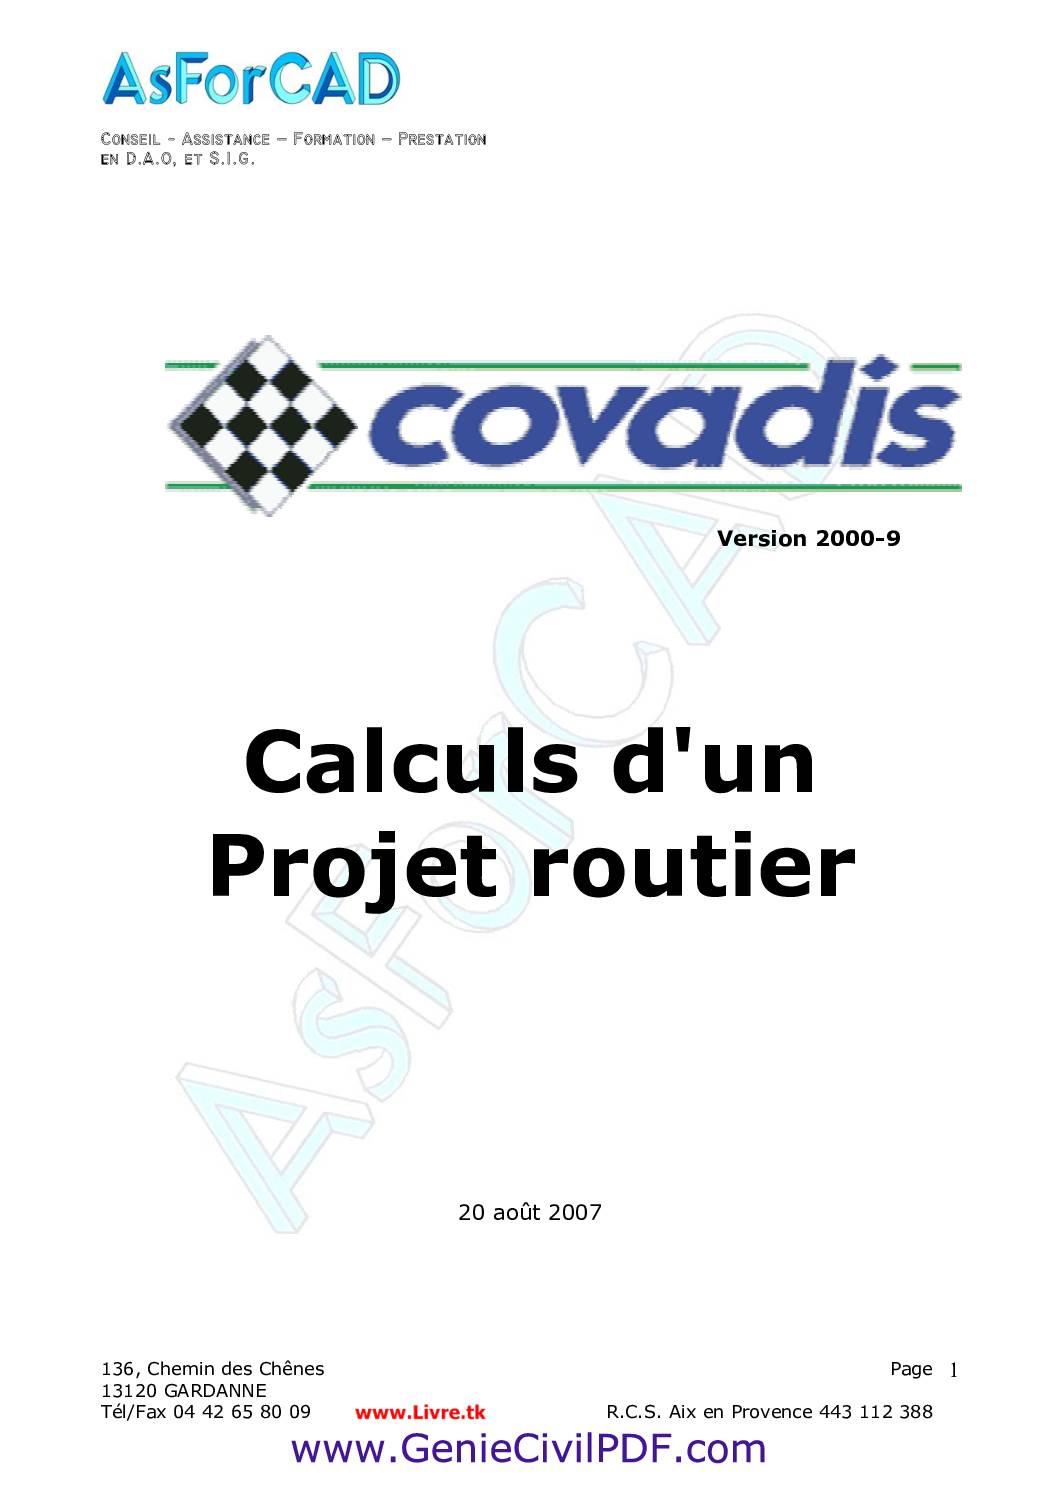 formation covadis cours projet routier